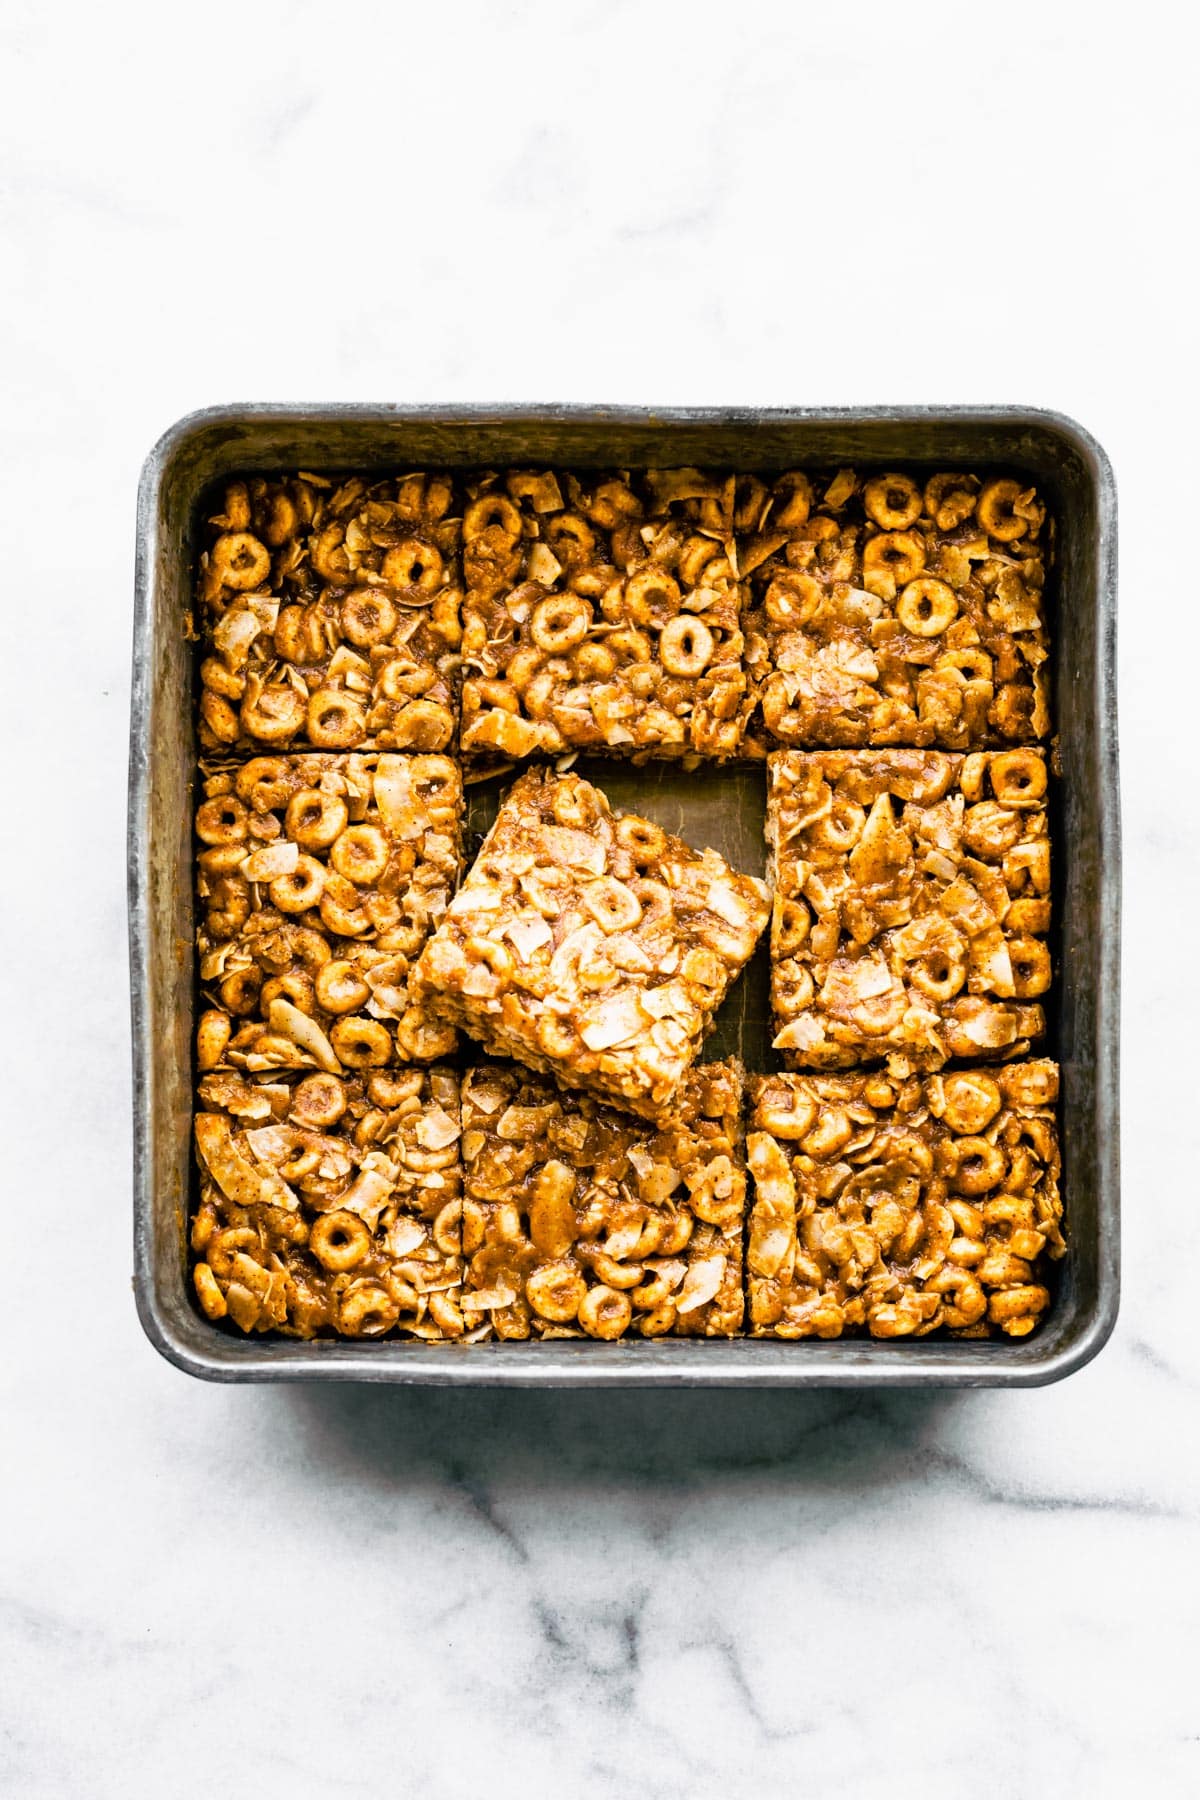 A pan of gluten free cereal bars with the middle piece sitting askew.